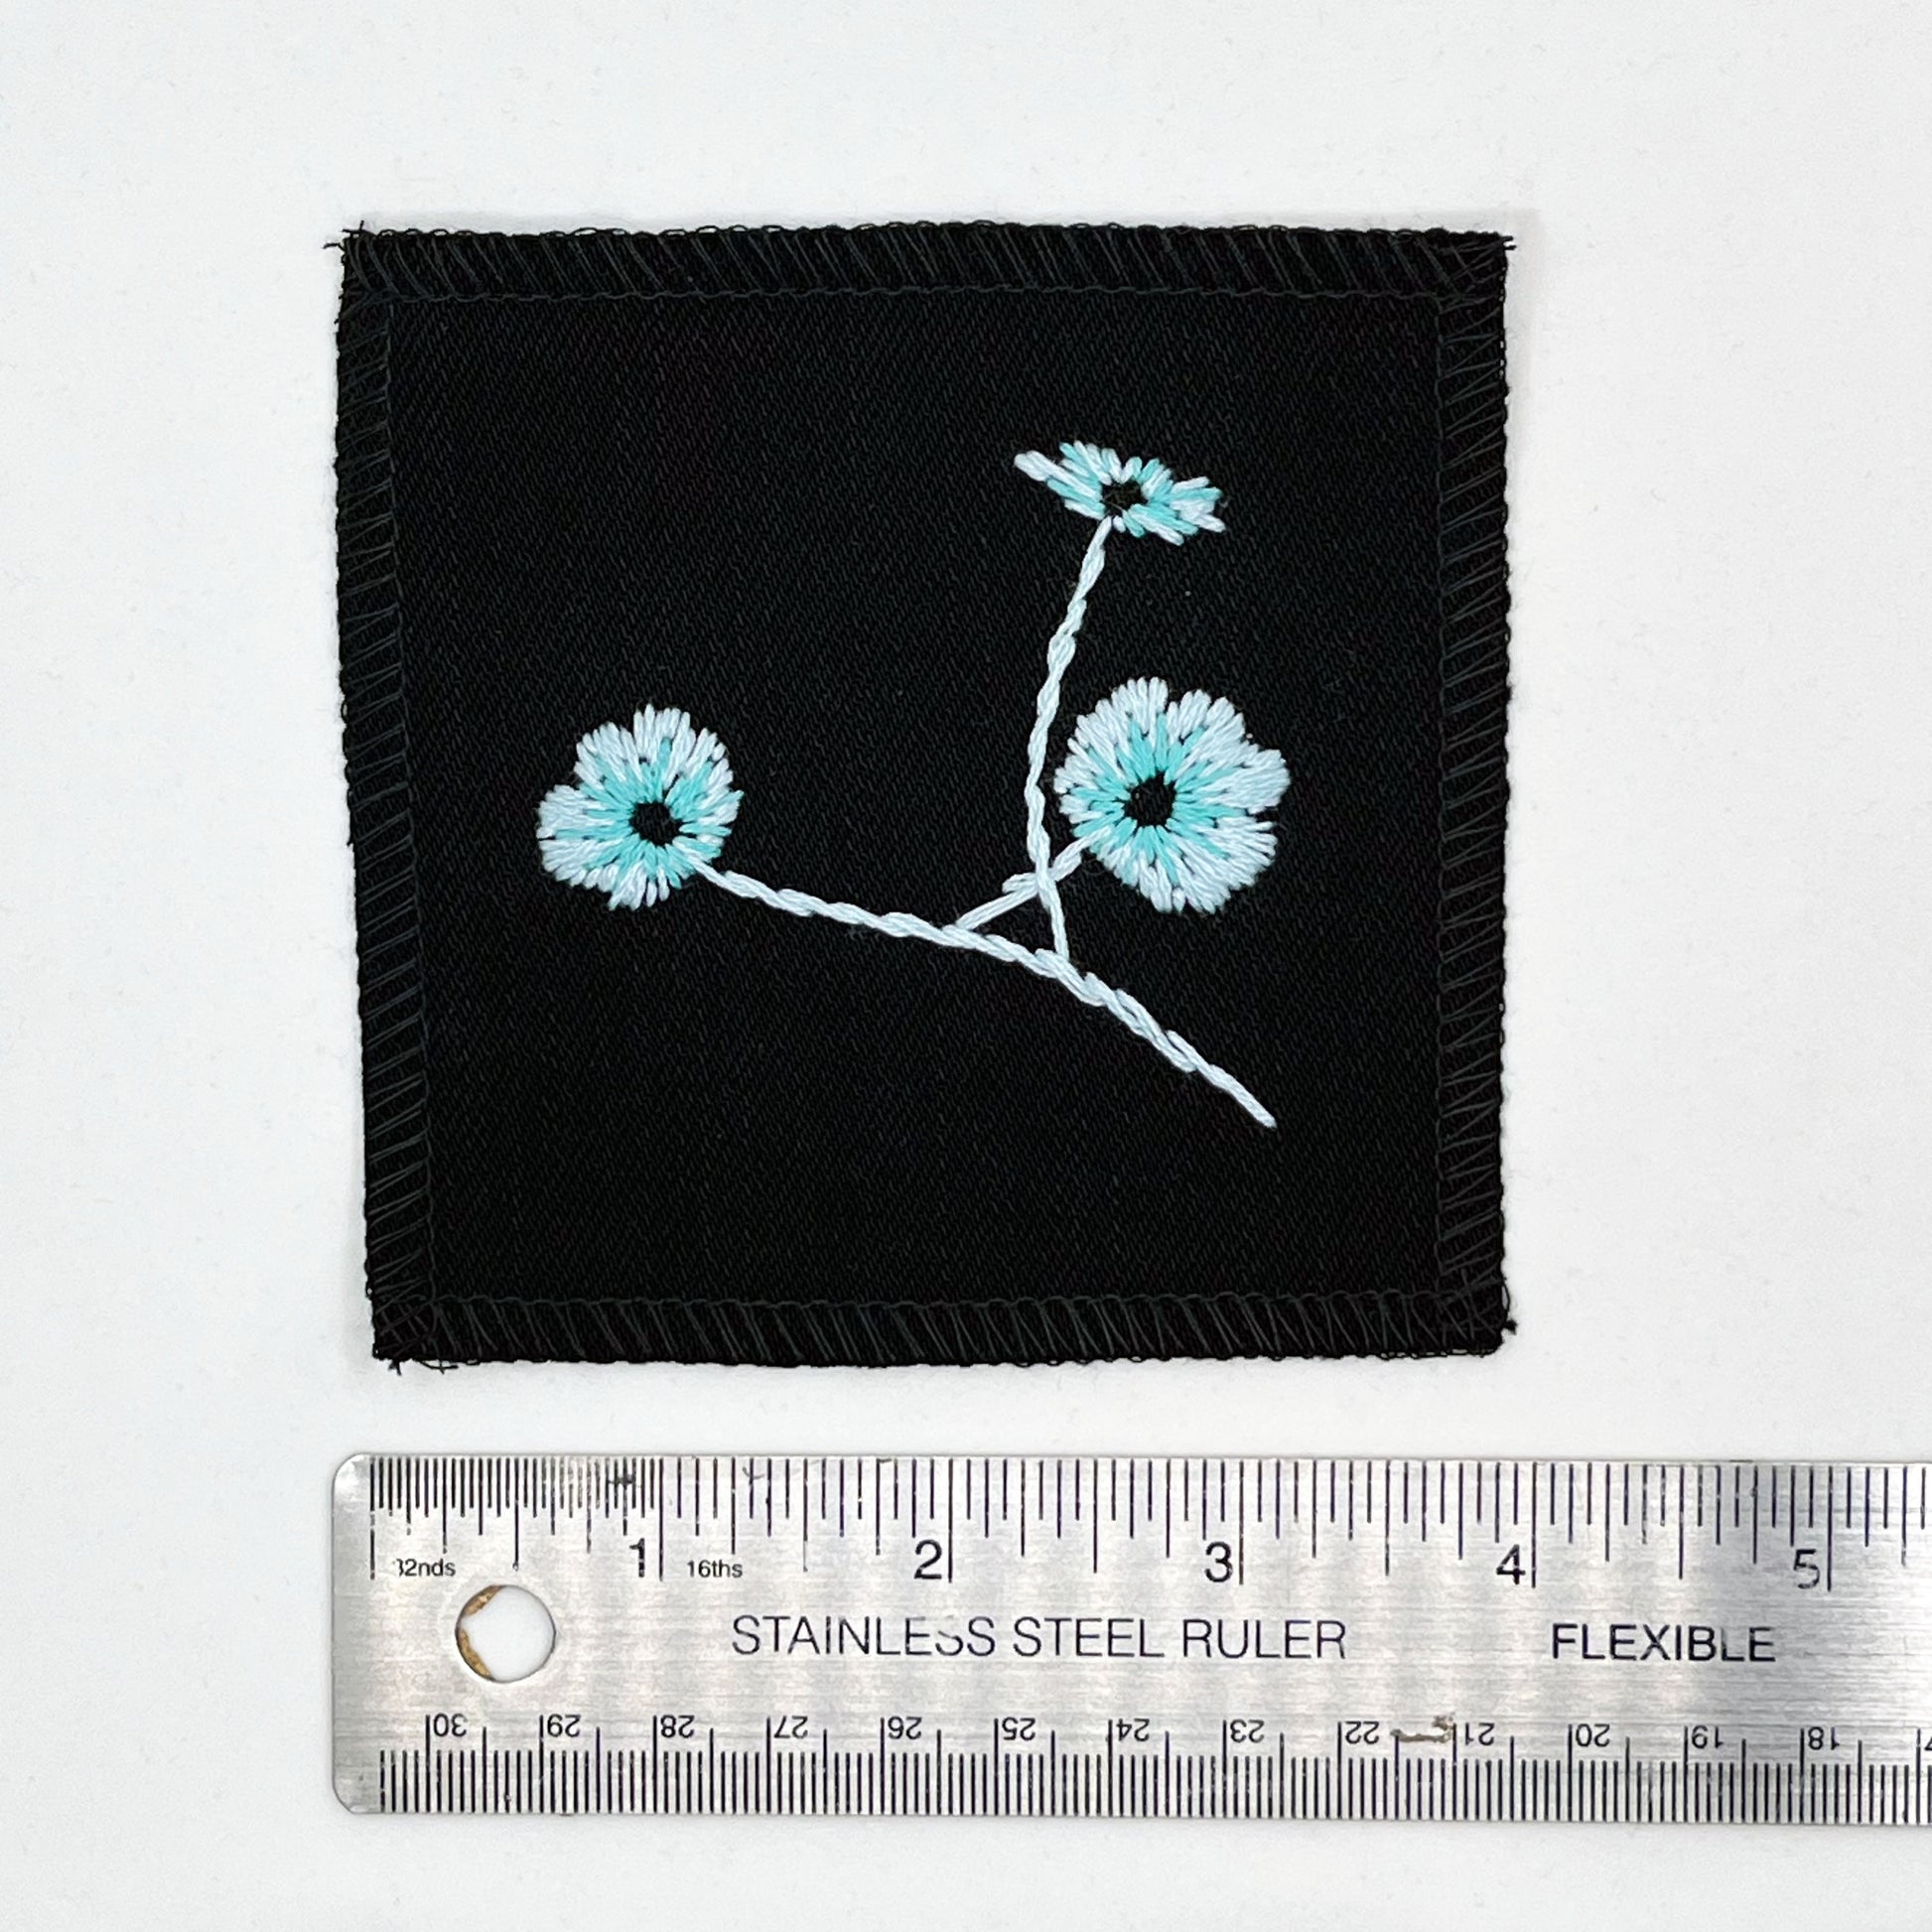 a black colored square patch, hand embroidered with three poppies on a stem, in shades of blue, with overlocked edges, placed next to a metal ruler to show a width of four inches, on a white background